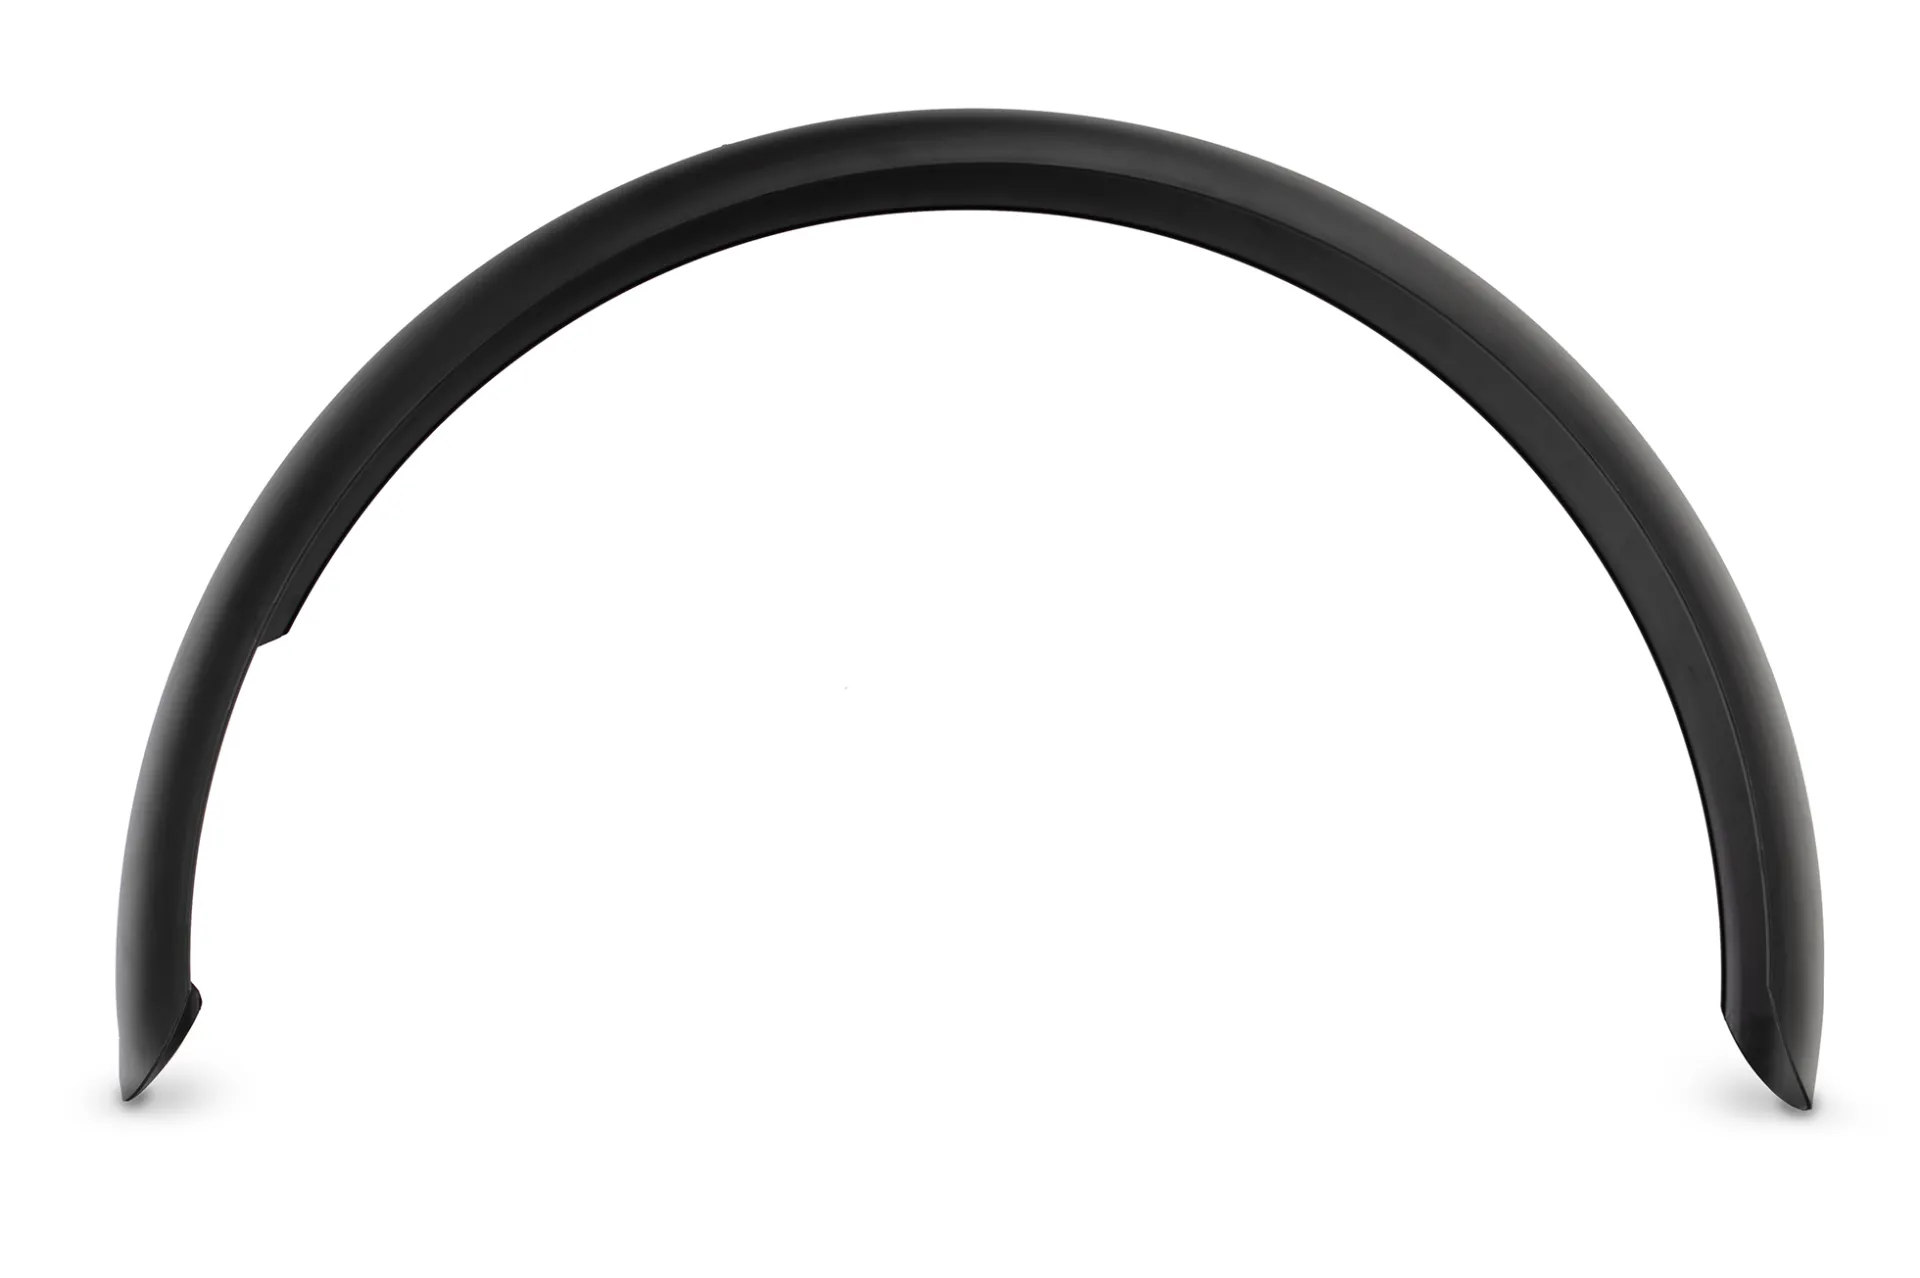 Fenders X27.5: Full-Length Mudguards for the Orox | Tern Bicycles